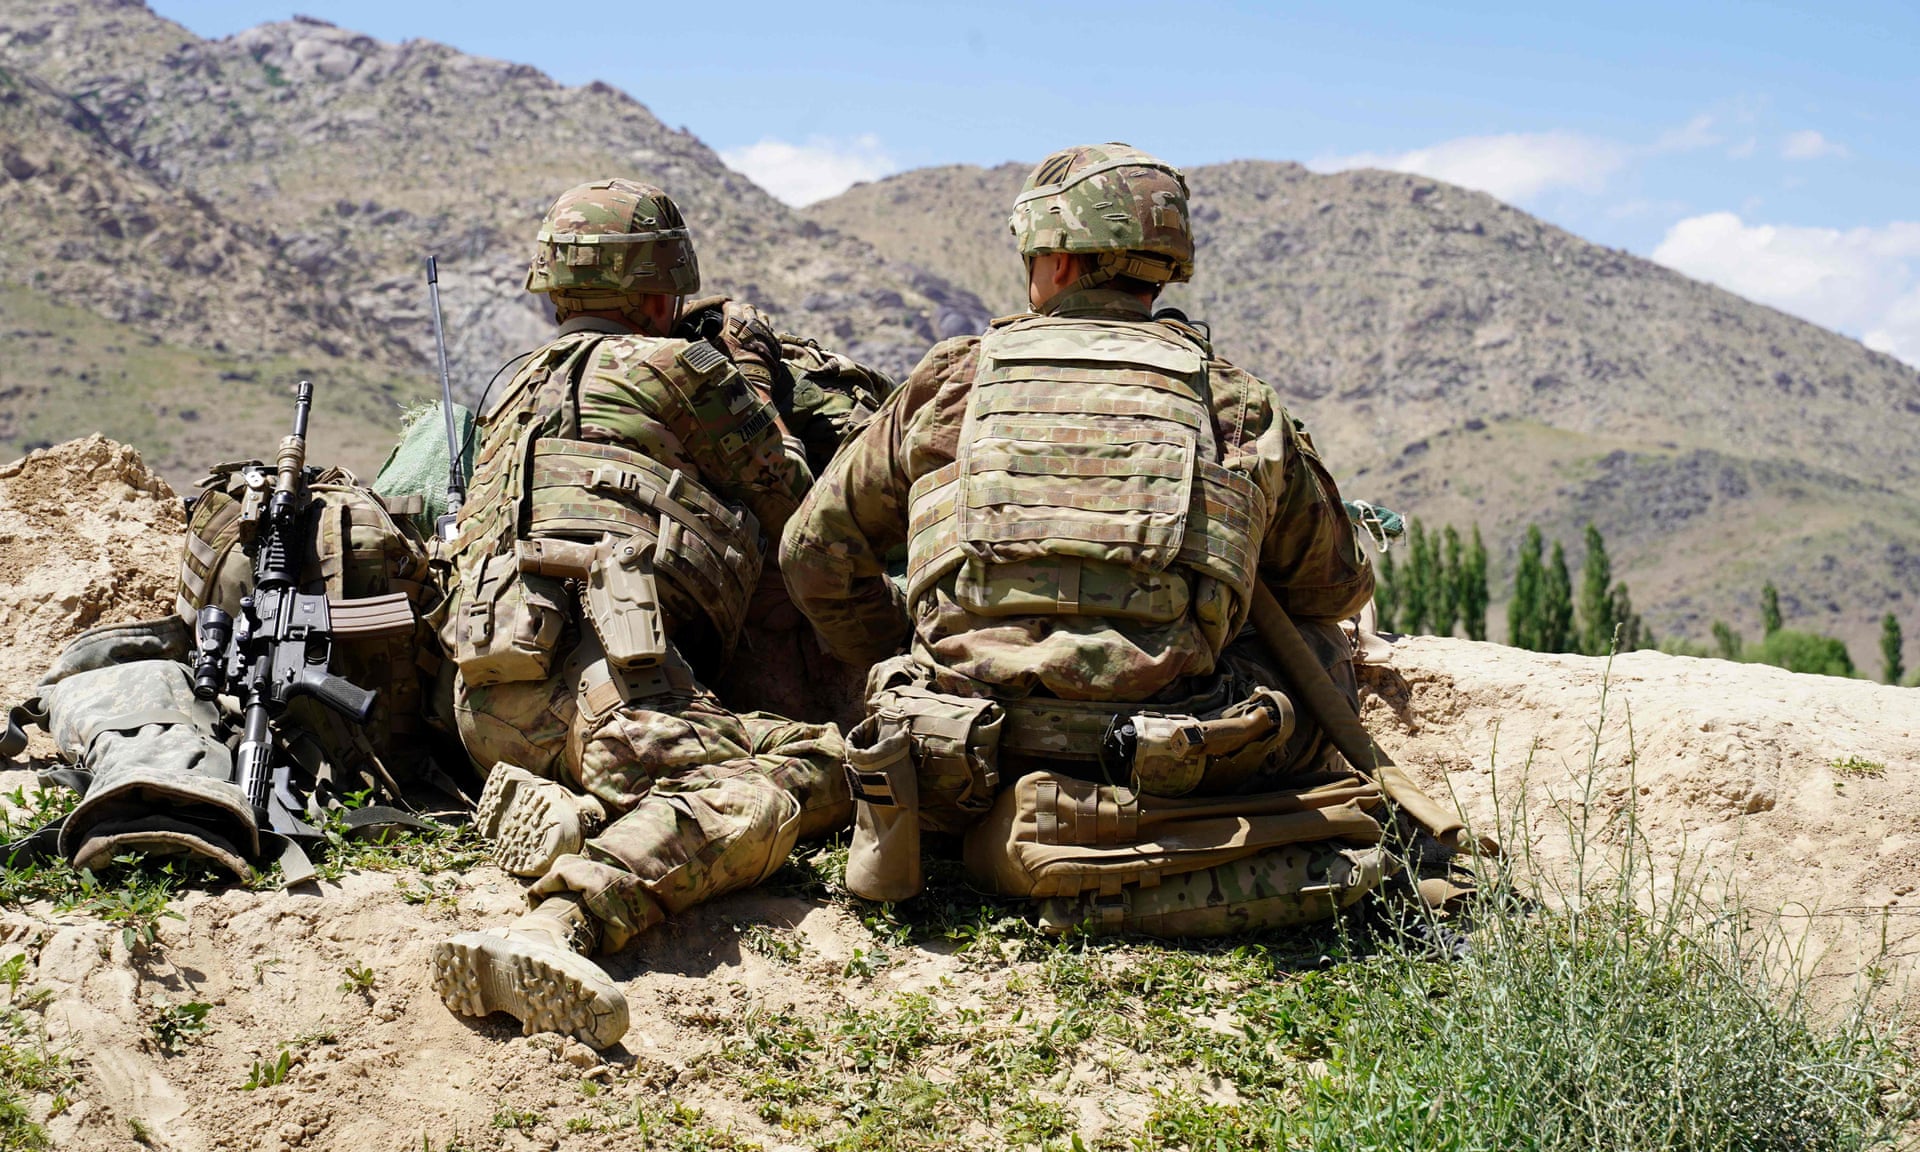 In this file photo taken on June 6, 2019 US soldiers look out over hillsides during a visit of the commander of US and NATO forces in Afghanistan General at the Afghan National Army (ANA) checkpoint in Nerkh district of Wardak province.